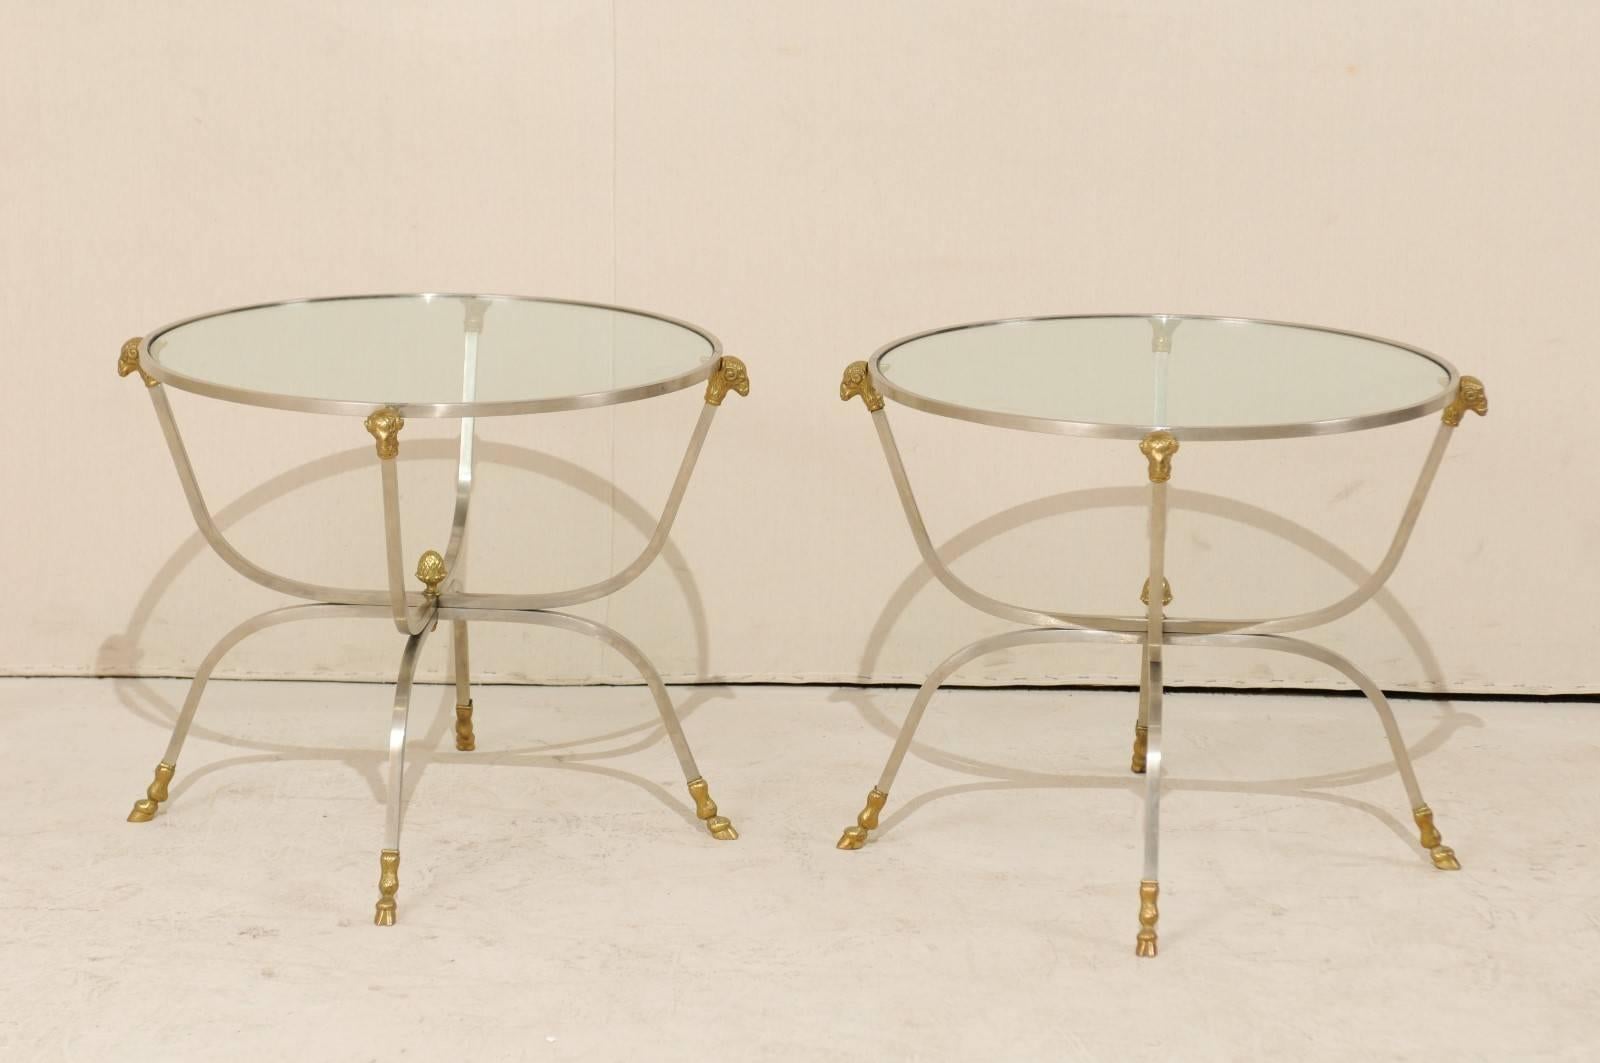 A pair of vintage Italian glass top occasional tables. This pair of Italian coffee tables from the mid-20th century feature round, glass tops, brass ram's head accents and hoofed animal feet. The frames are a silver metal and are made in a higher